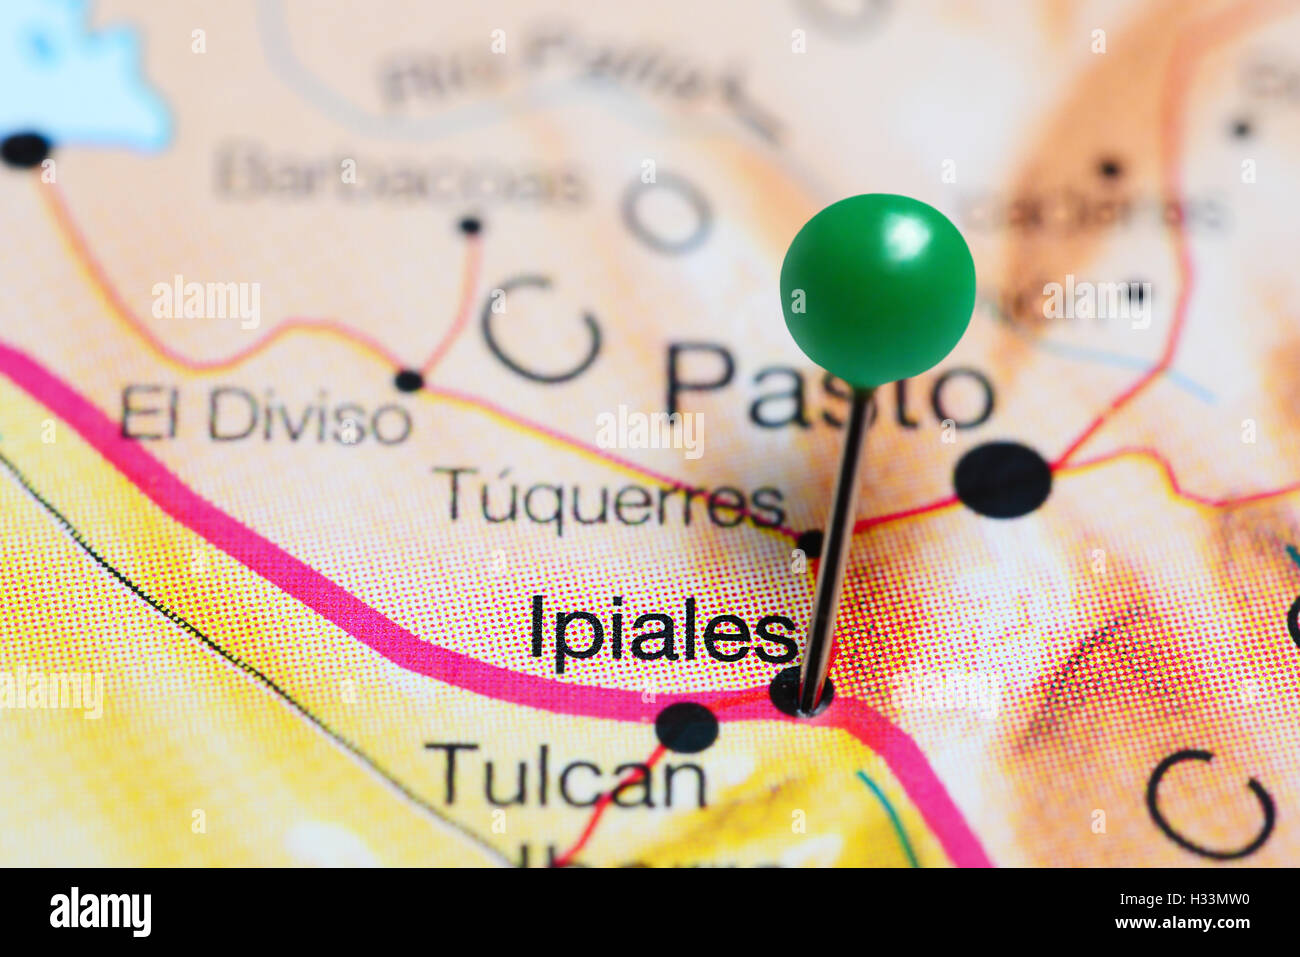 Ipiales Pinned On A Map Of Colombia H33MW0 